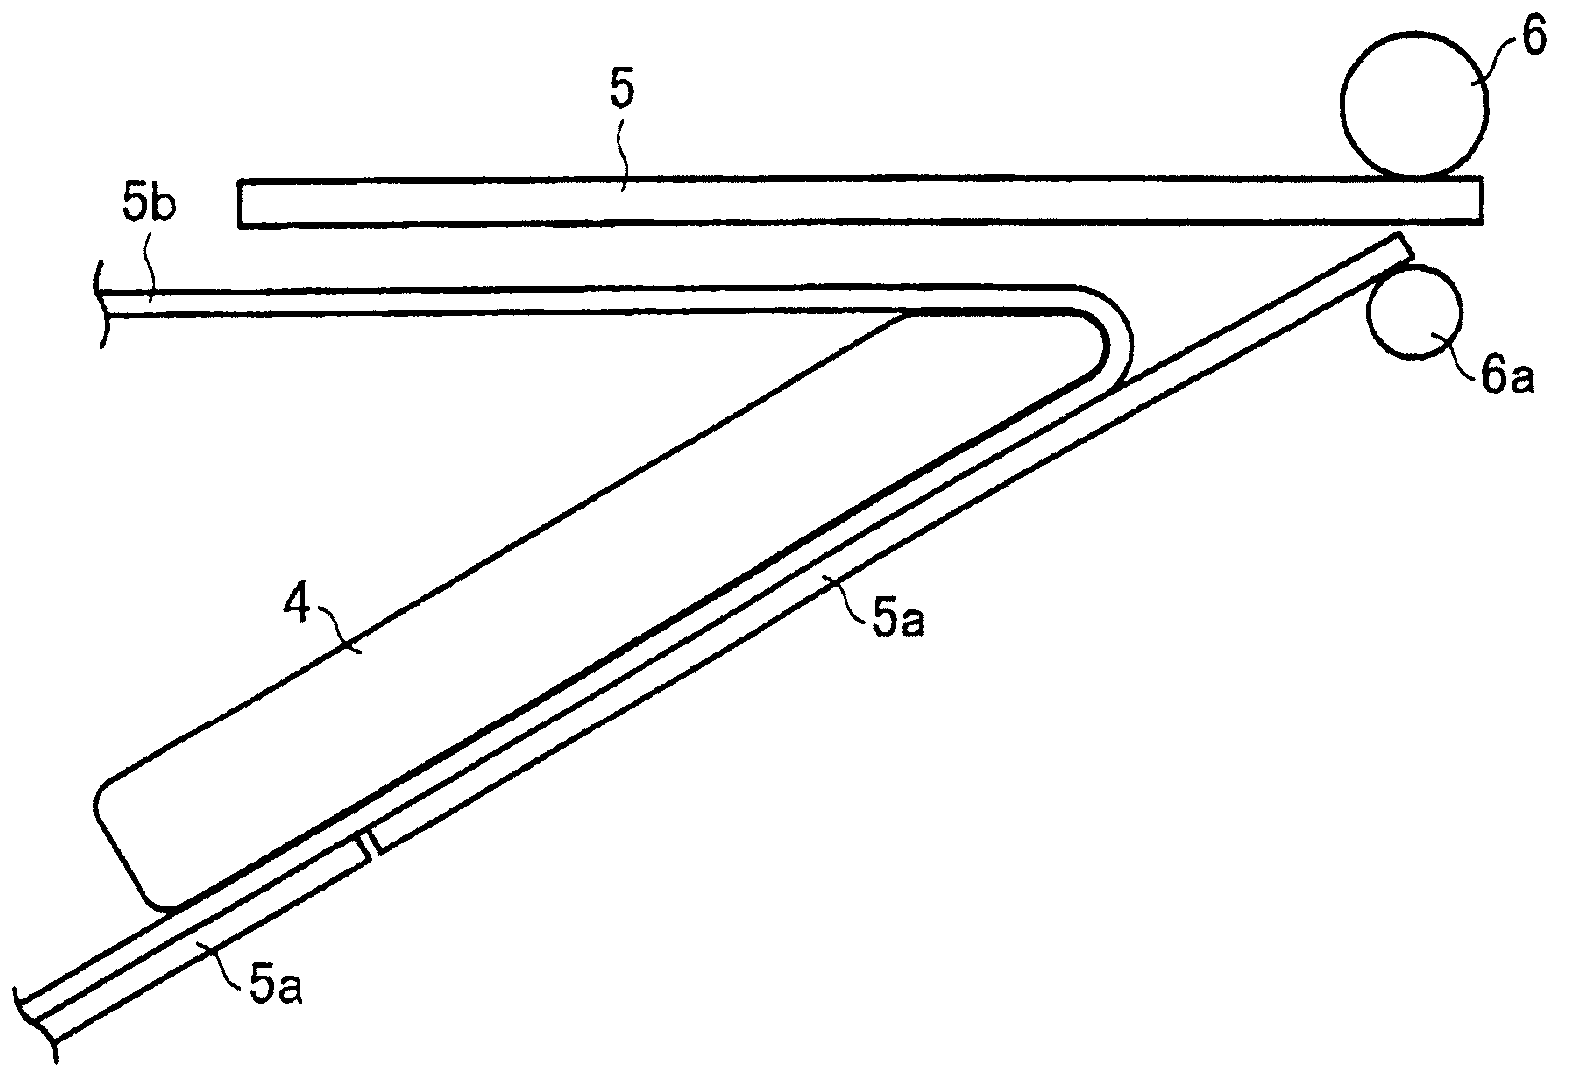 Substrate conveyance mechanism, polarizing film lamination device and LCD device manufacturing system provided therewith